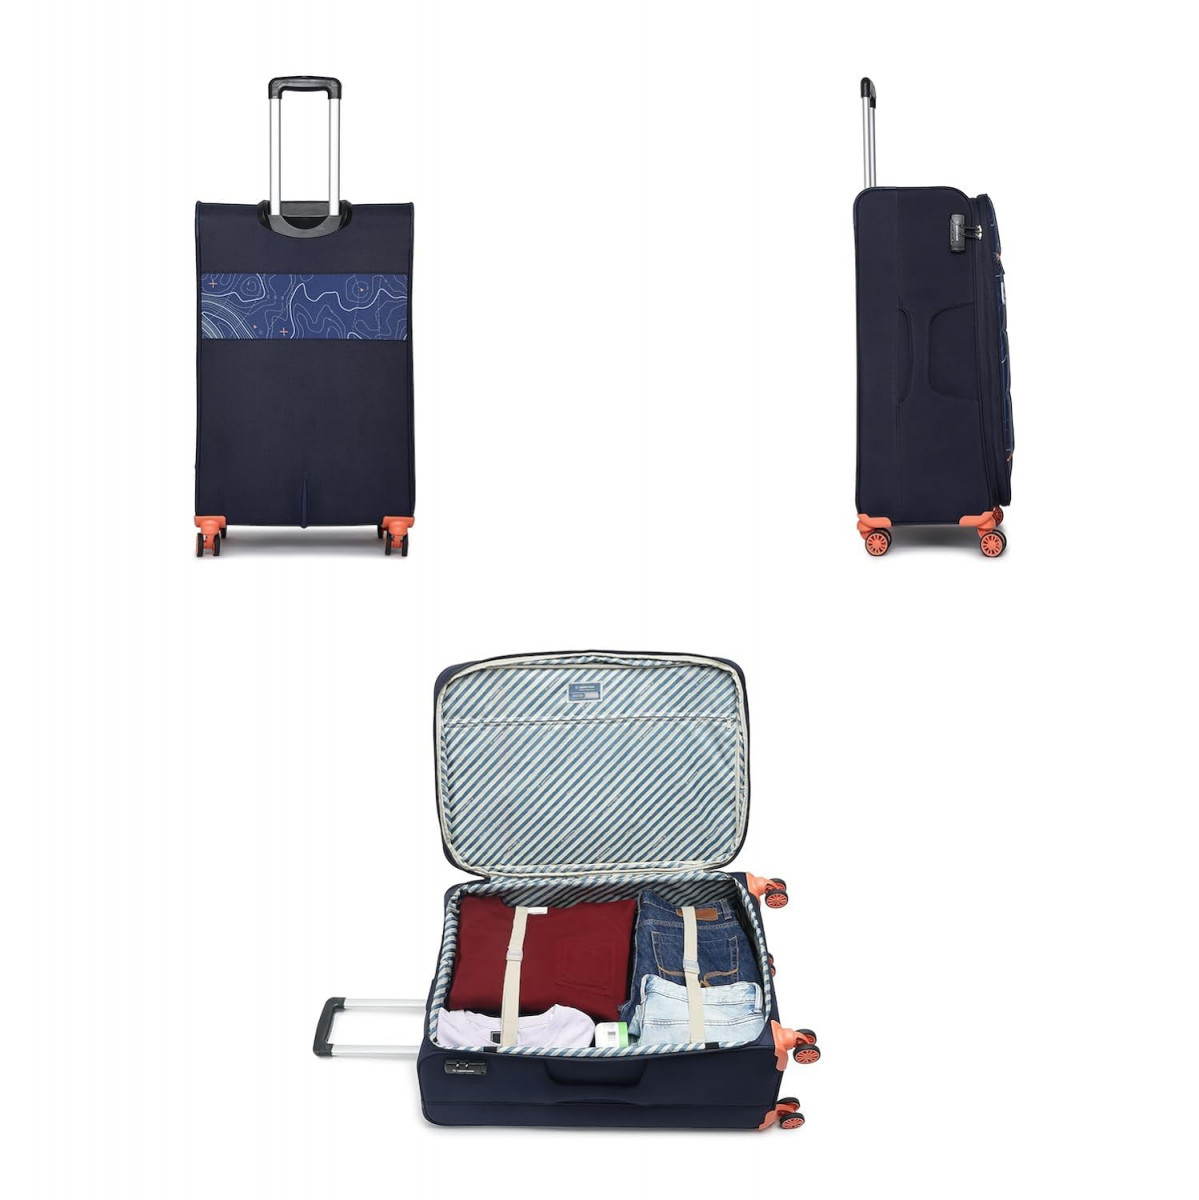 uppercase Topolite Trolley Bag Set of 2 ML Sustainable Check-in LuggageSoft Printed Luggage Combination Lock 8 Wheel Suitcase for Men  Women 2500 Days Warranty Blue